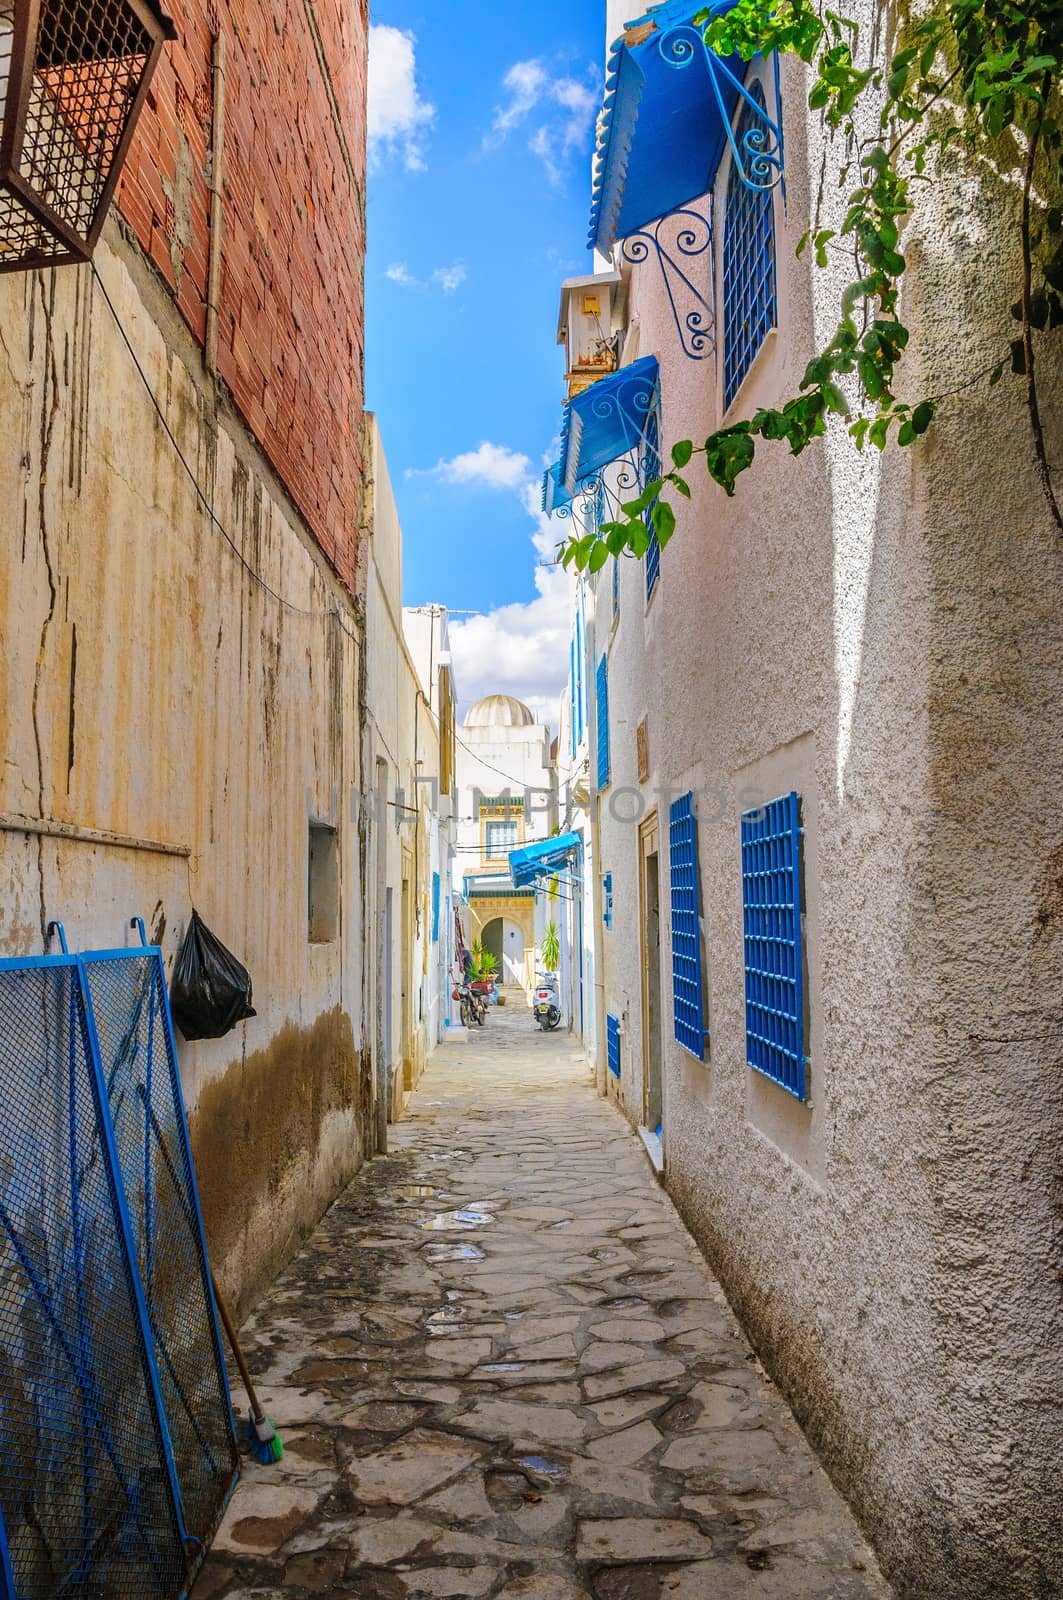 Narrow street with white houses in Hammamet Tunisia by Eagle2308